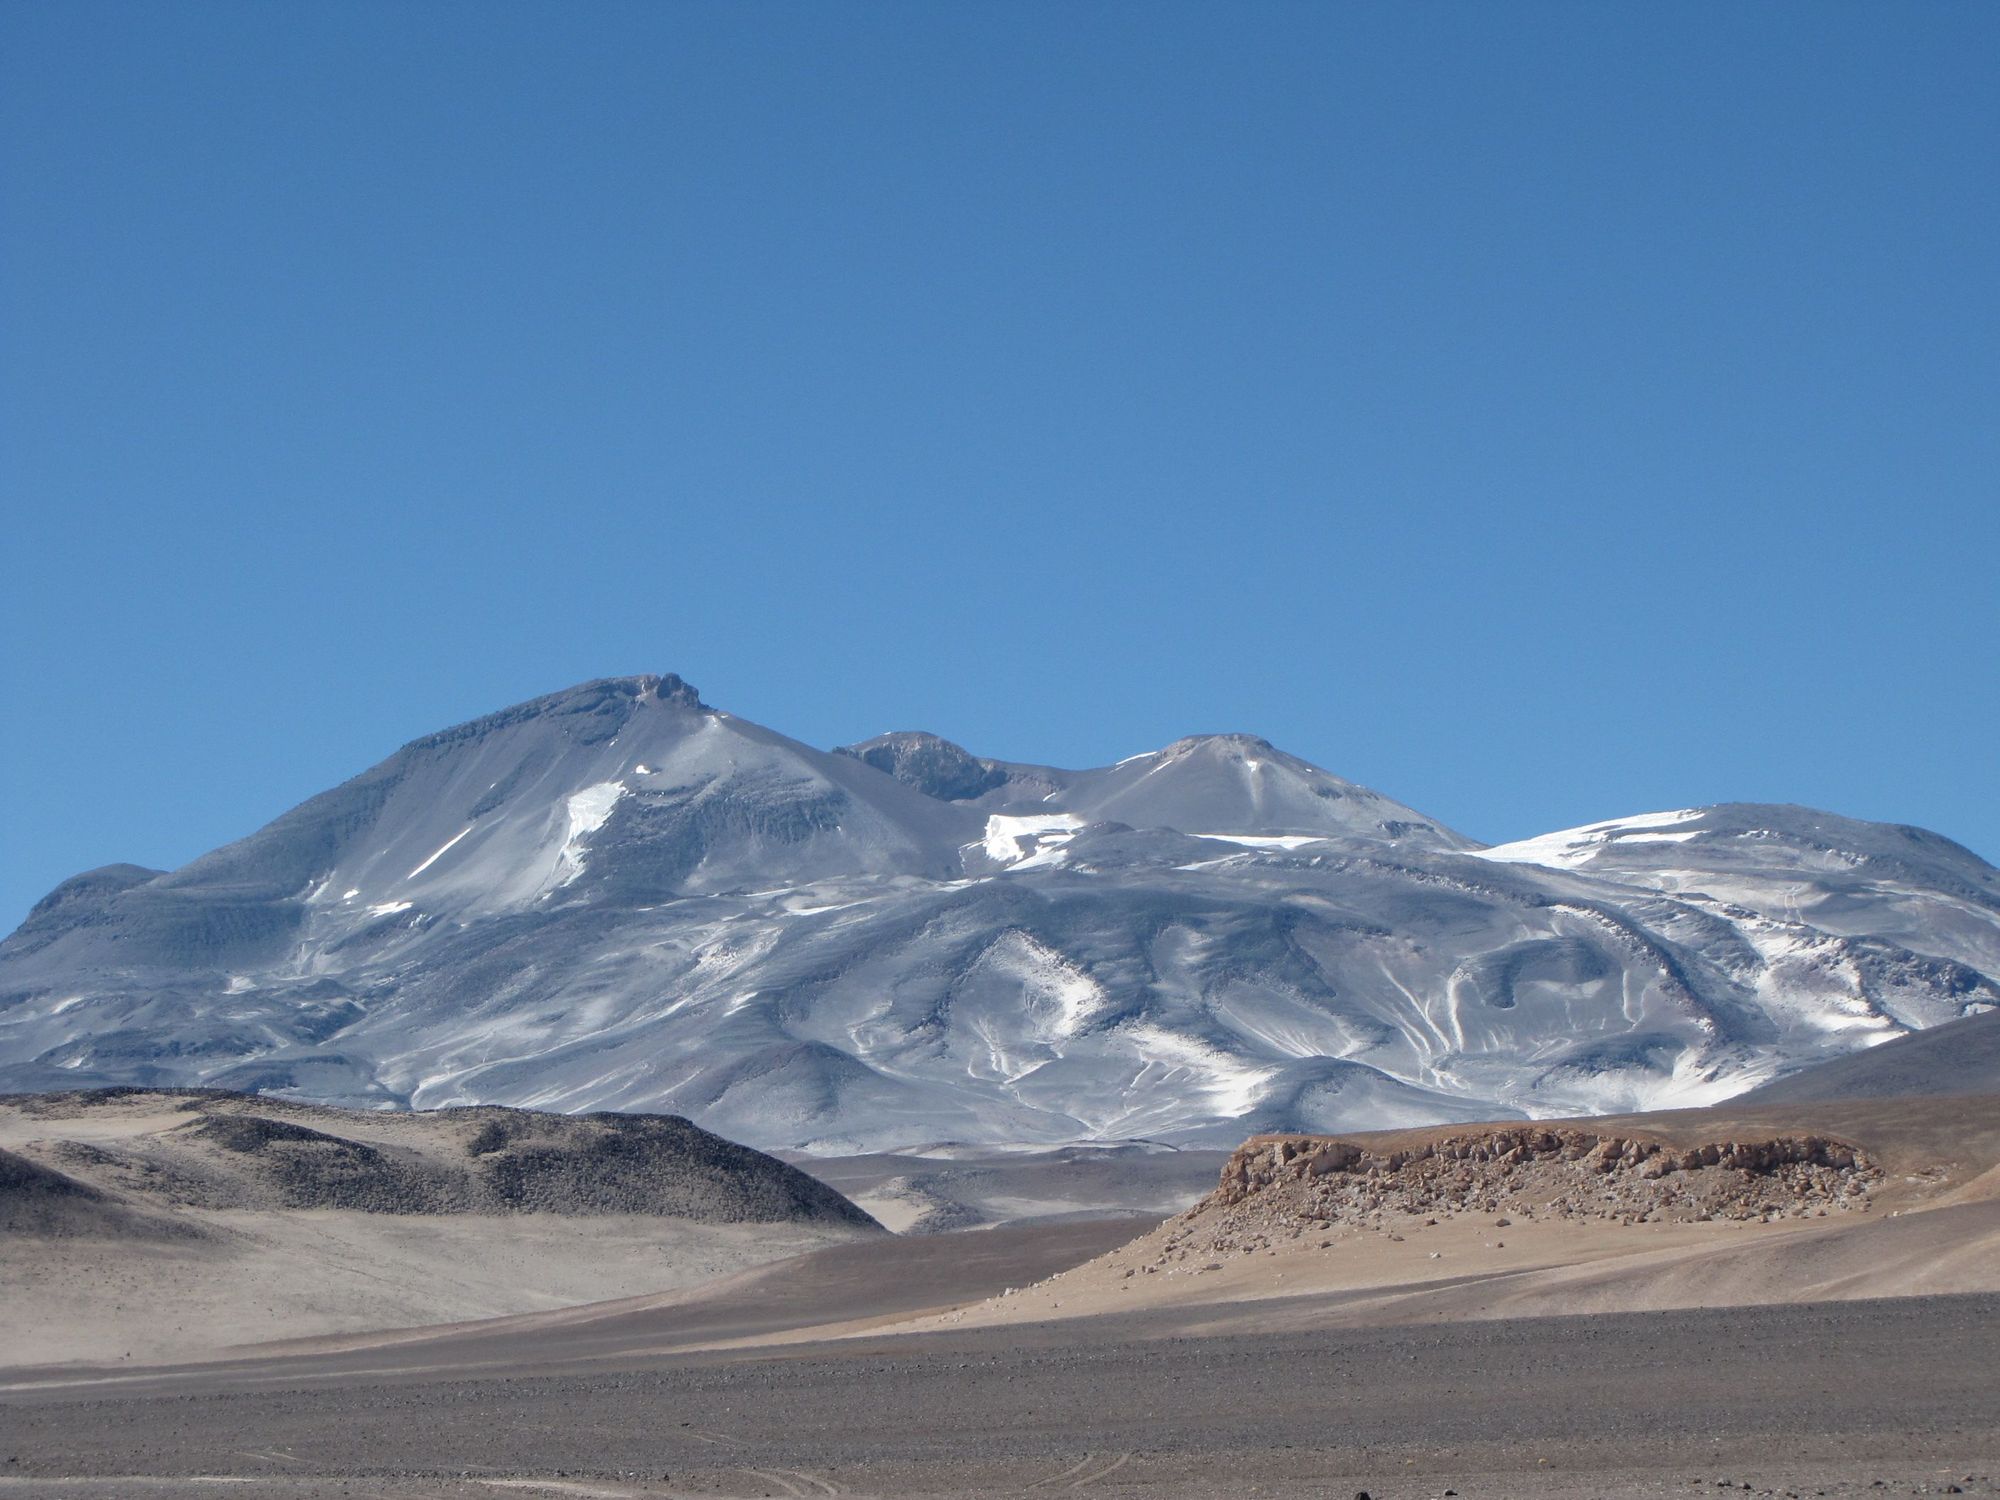 Ojos del Salado on the Argentina-Chile border, the world's highest volcano at 6,893 m (22,615 ft). Photo: Wiki Commons